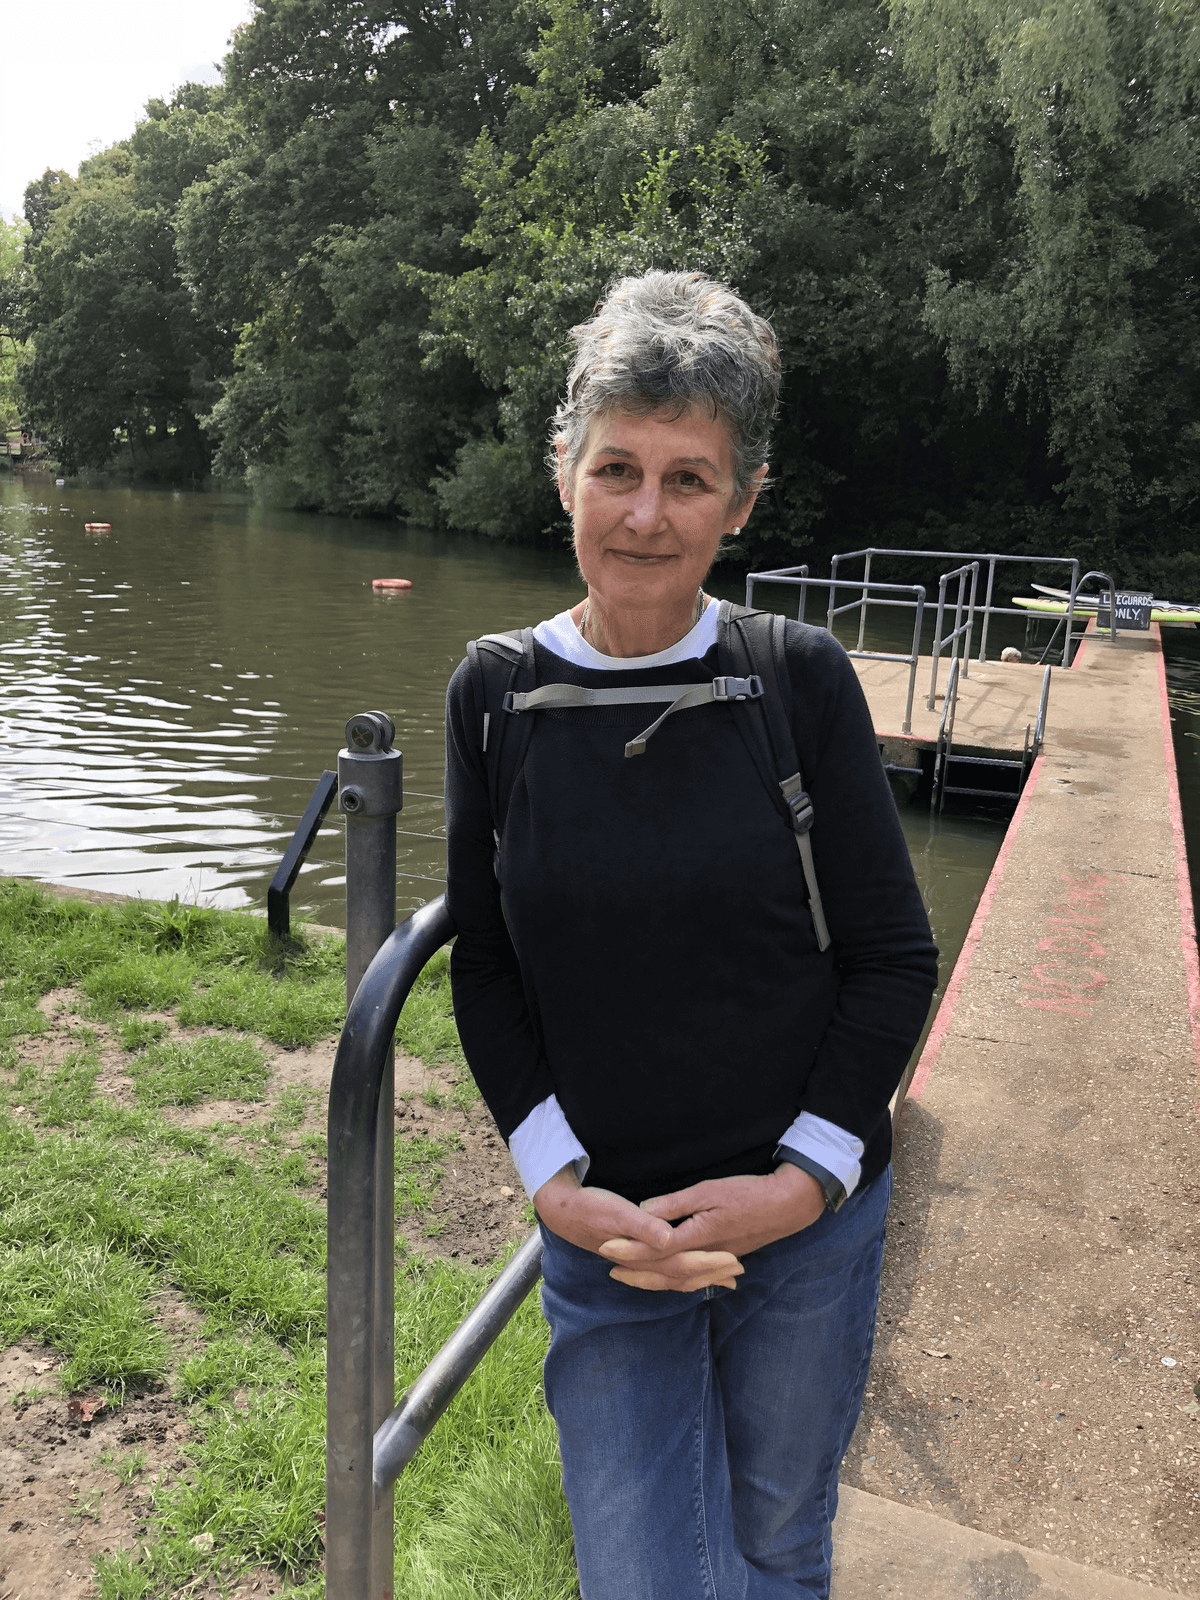 Nicky Mayhew is the co-chair of the Kenwood Ladies' Pond Association